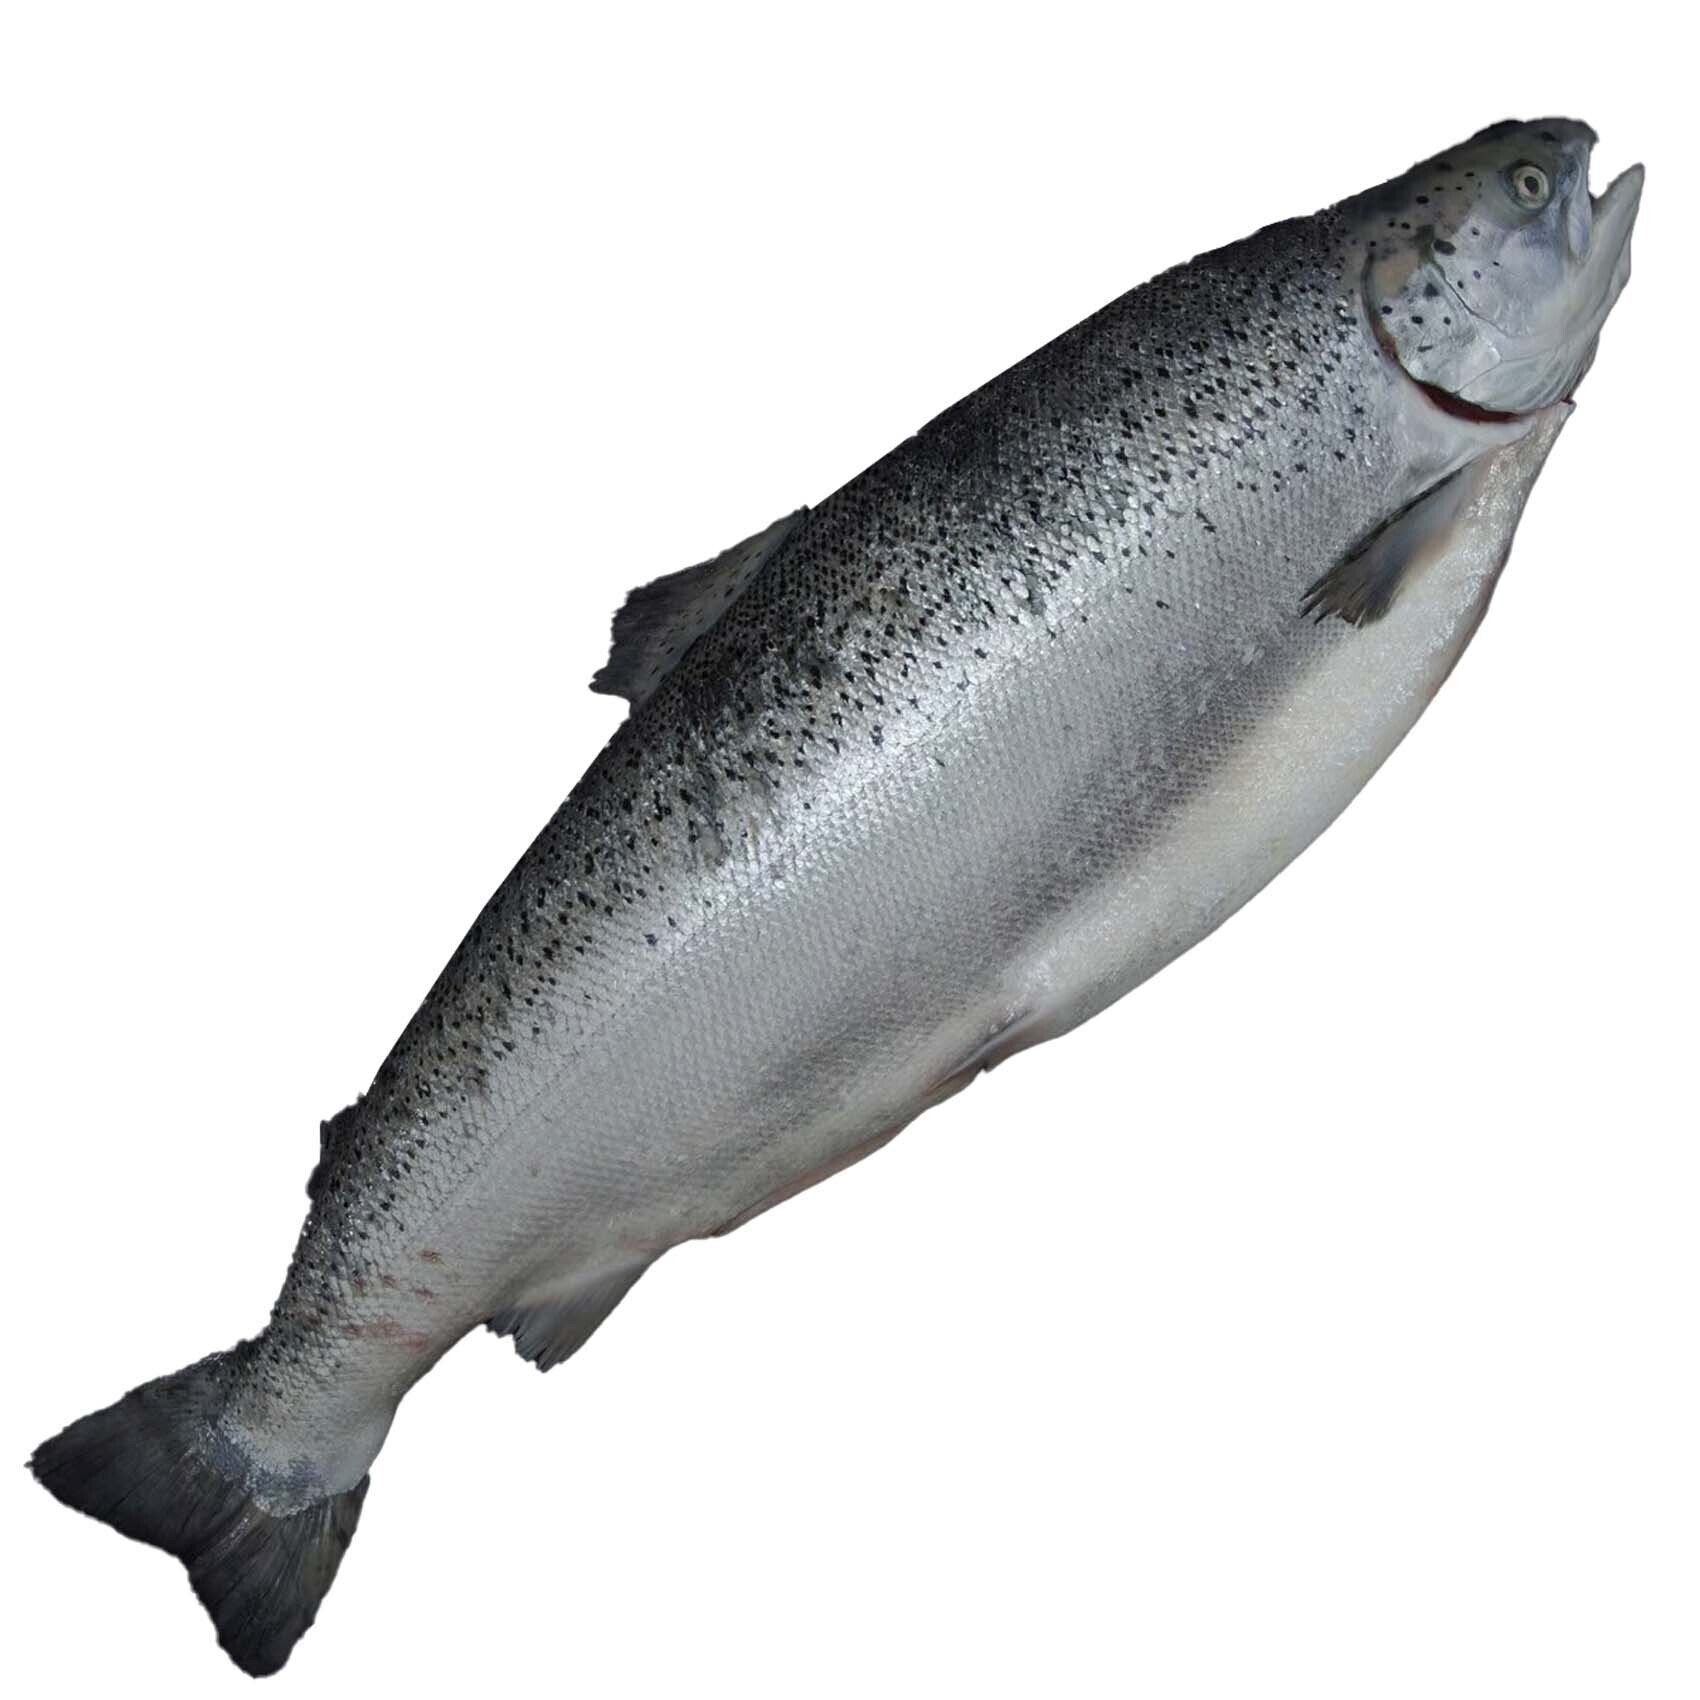 Buy SALMON WHOLE FISH NORWAY KG Online